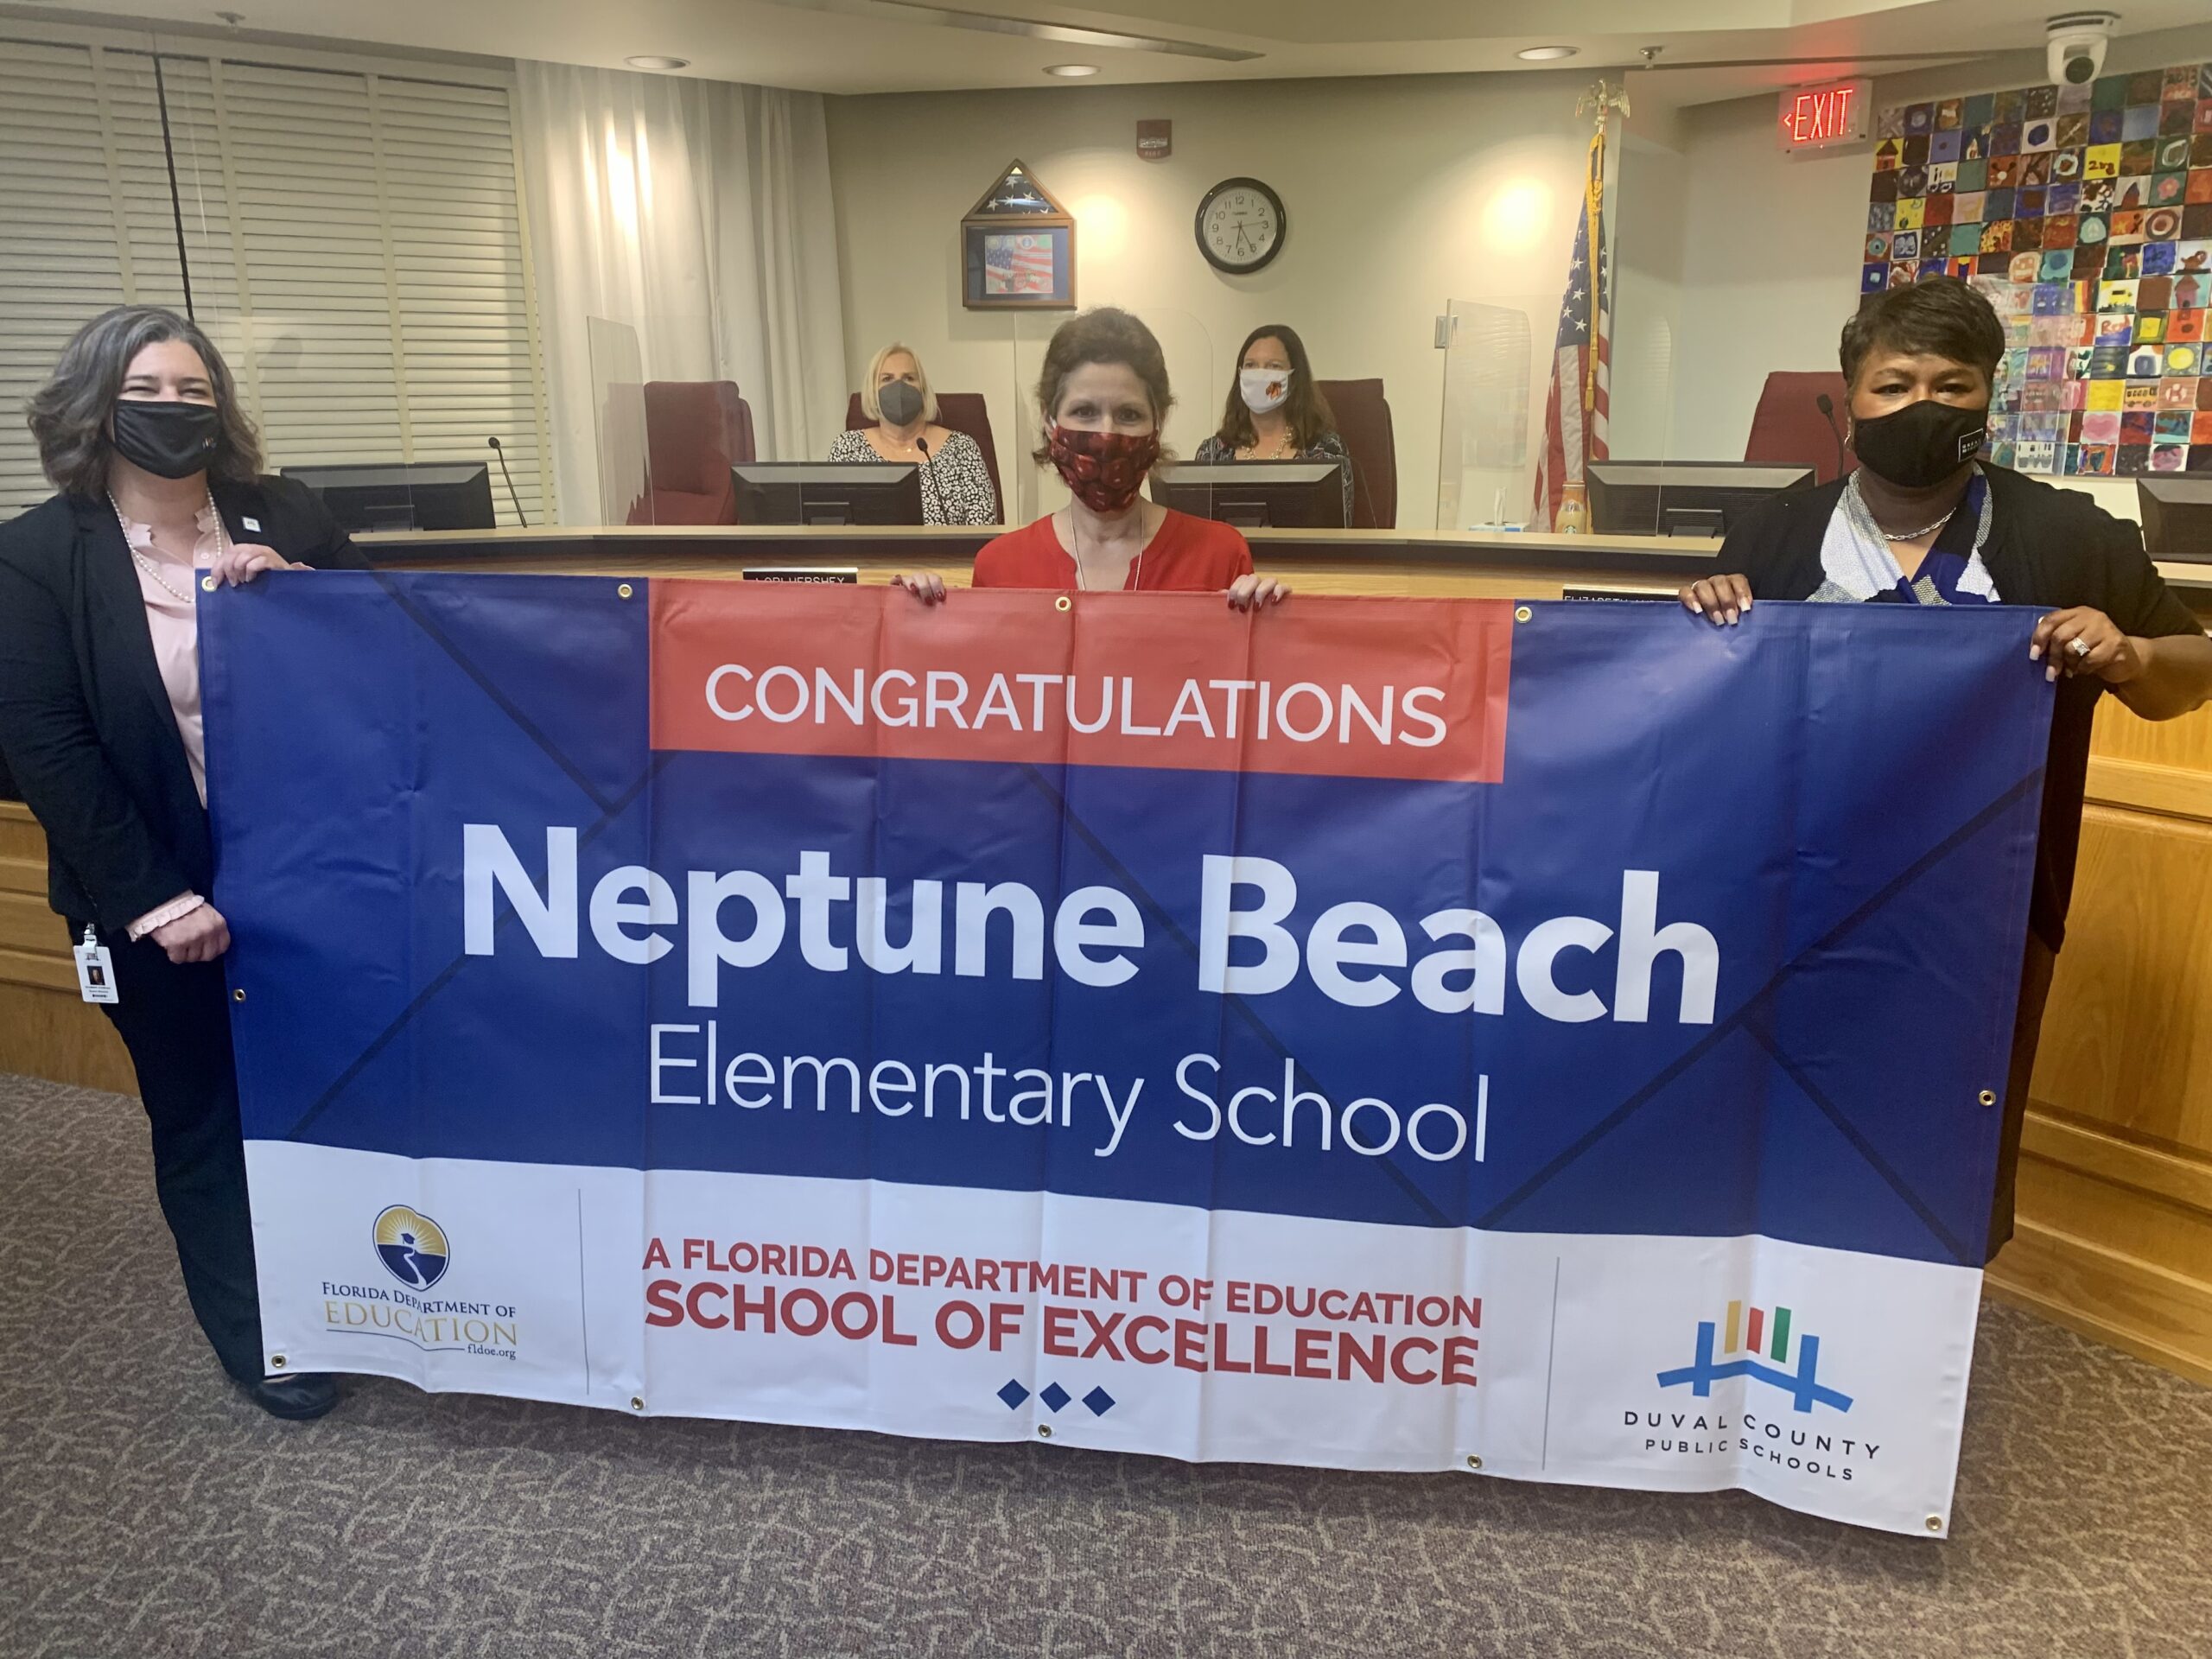 Superintendent, Board Member and school administrator hold banner Congratulations Neptune Beach Elementary School a Florida Department of Education School of Excellence